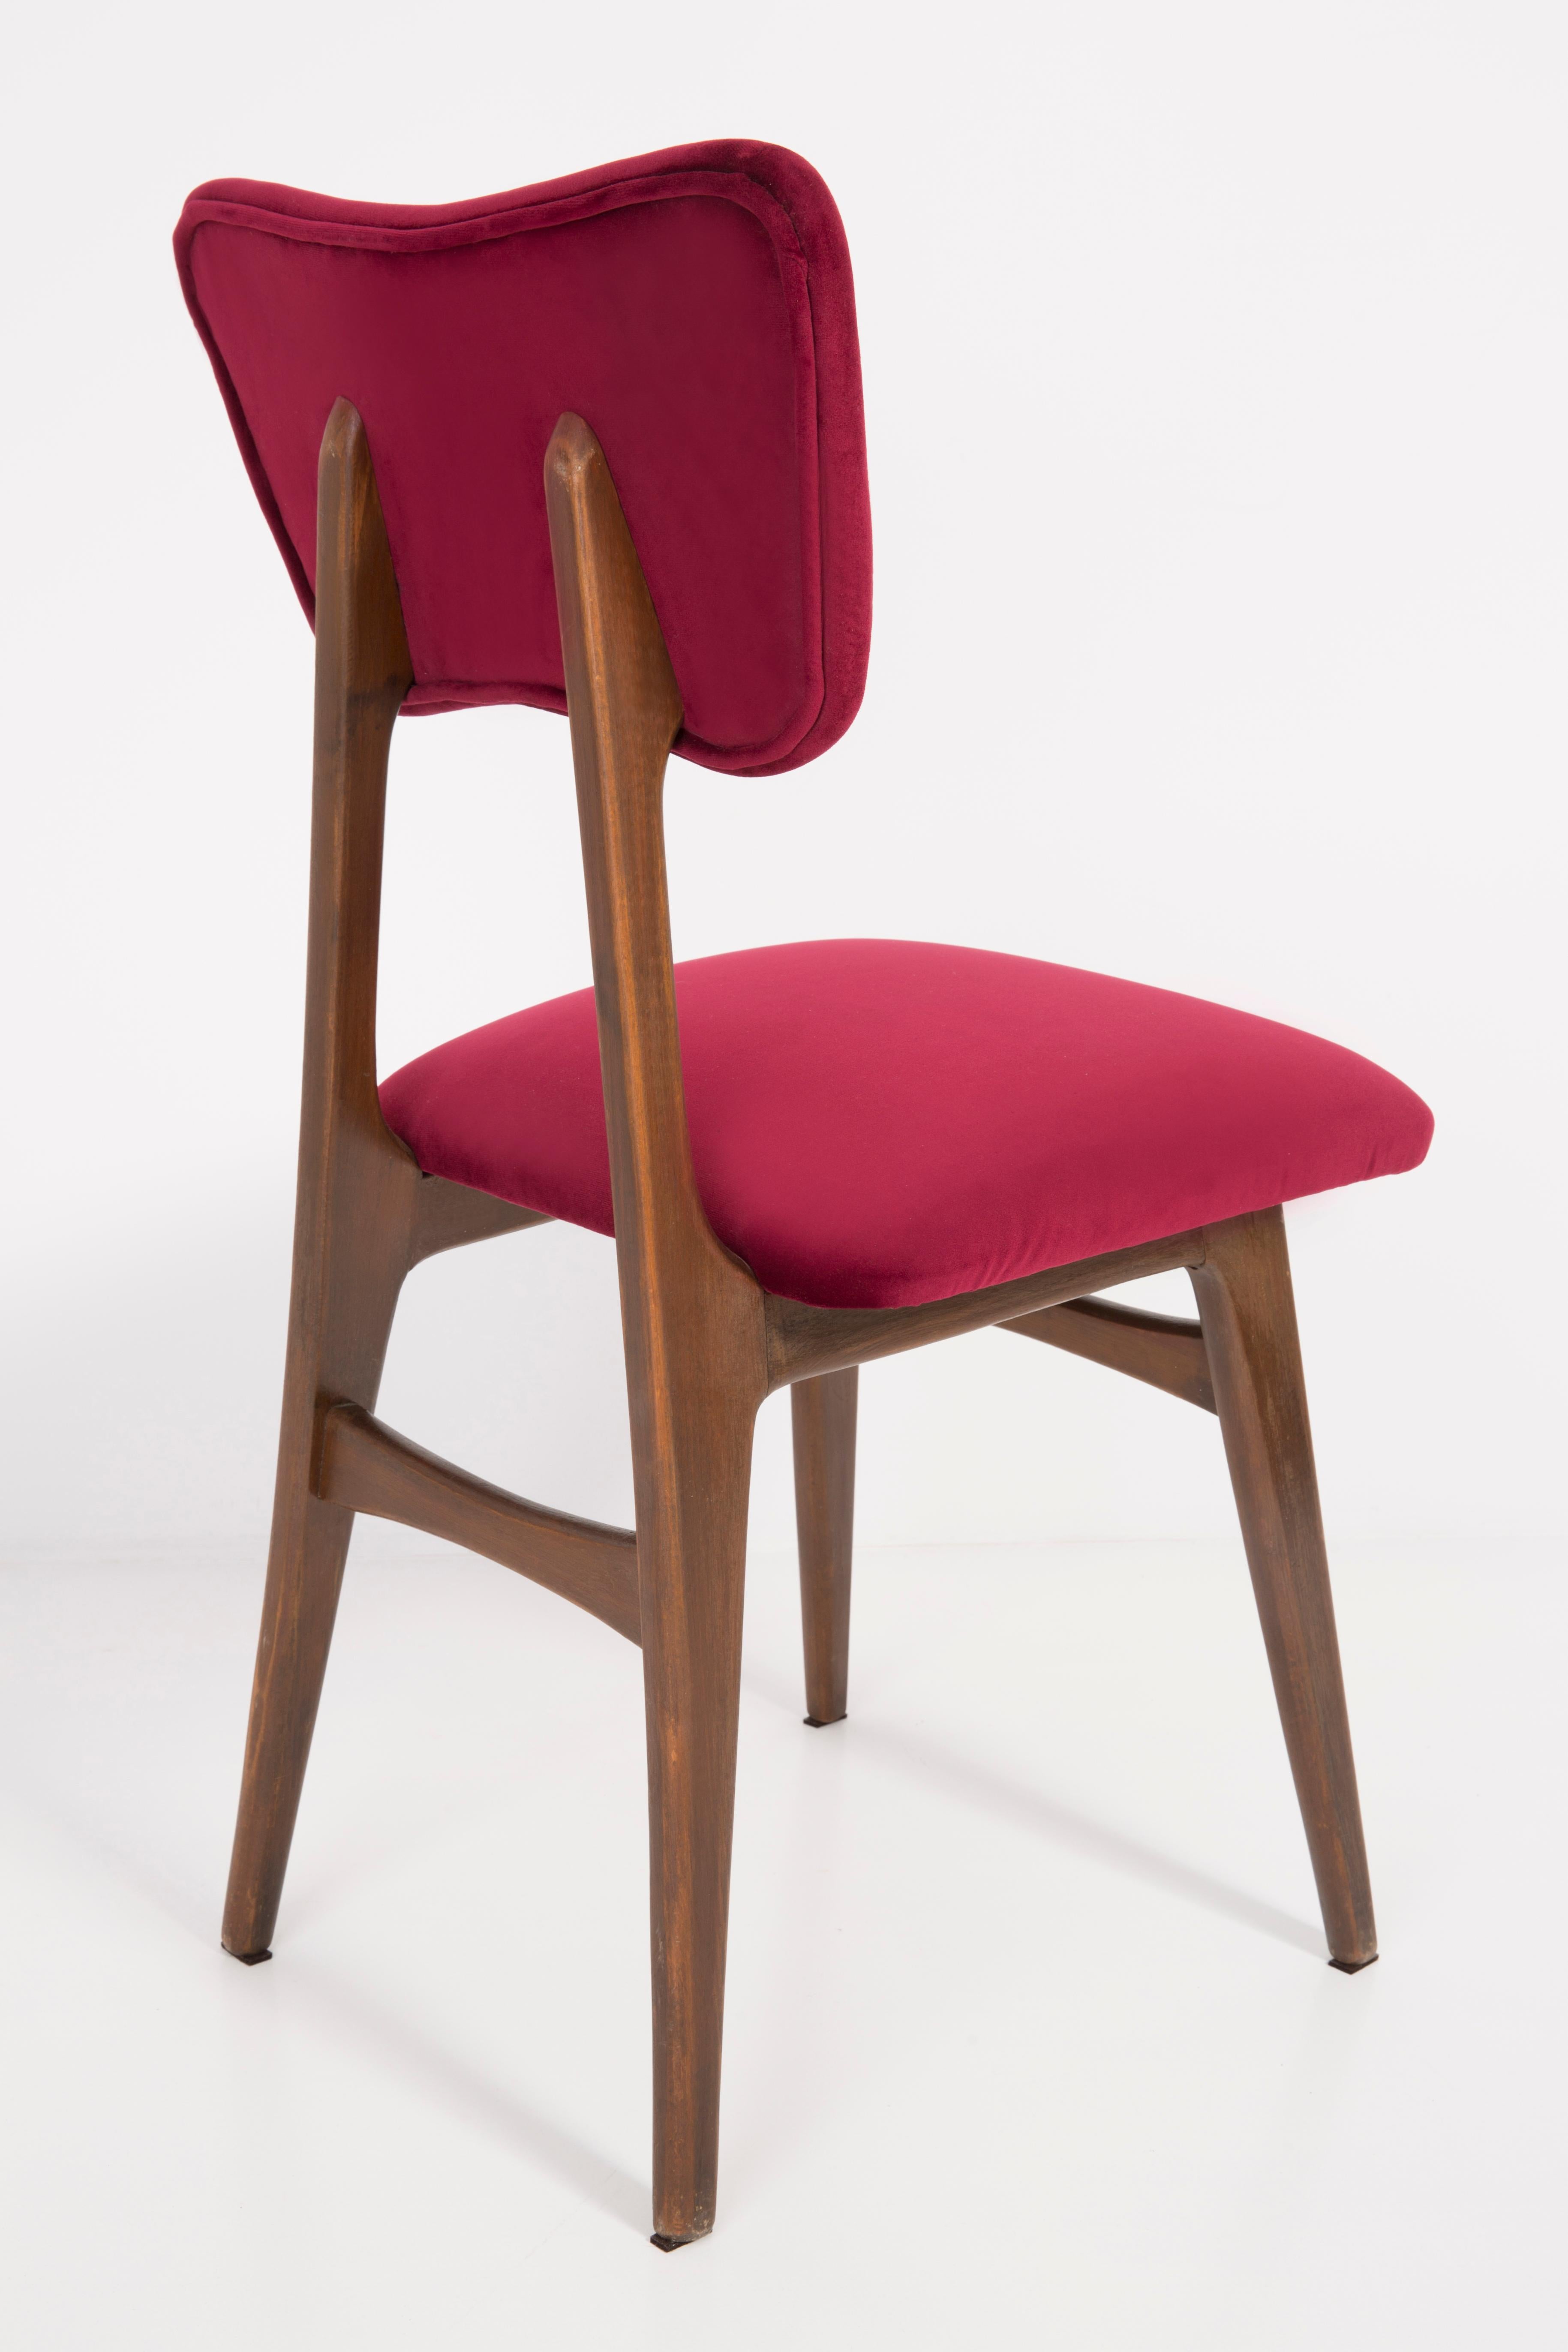 Six 20th Century Burgundy Red Chairs, 1960s In Excellent Condition For Sale In 05-080 Hornowek, PL